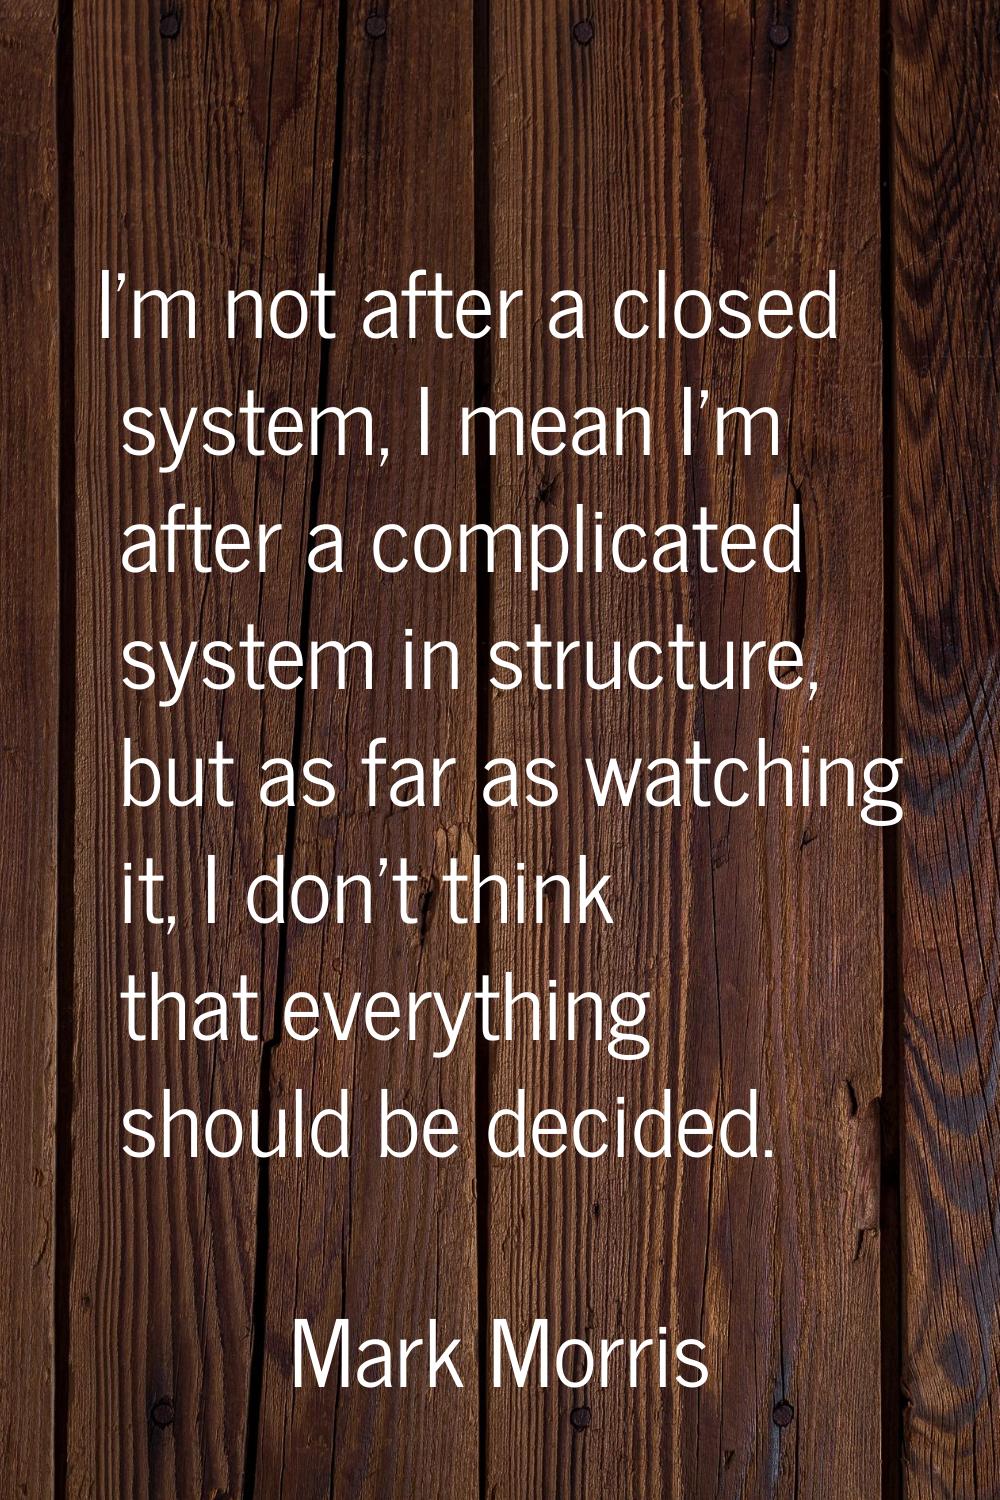 I'm not after a closed system, I mean I'm after a complicated system in structure, but as far as wa